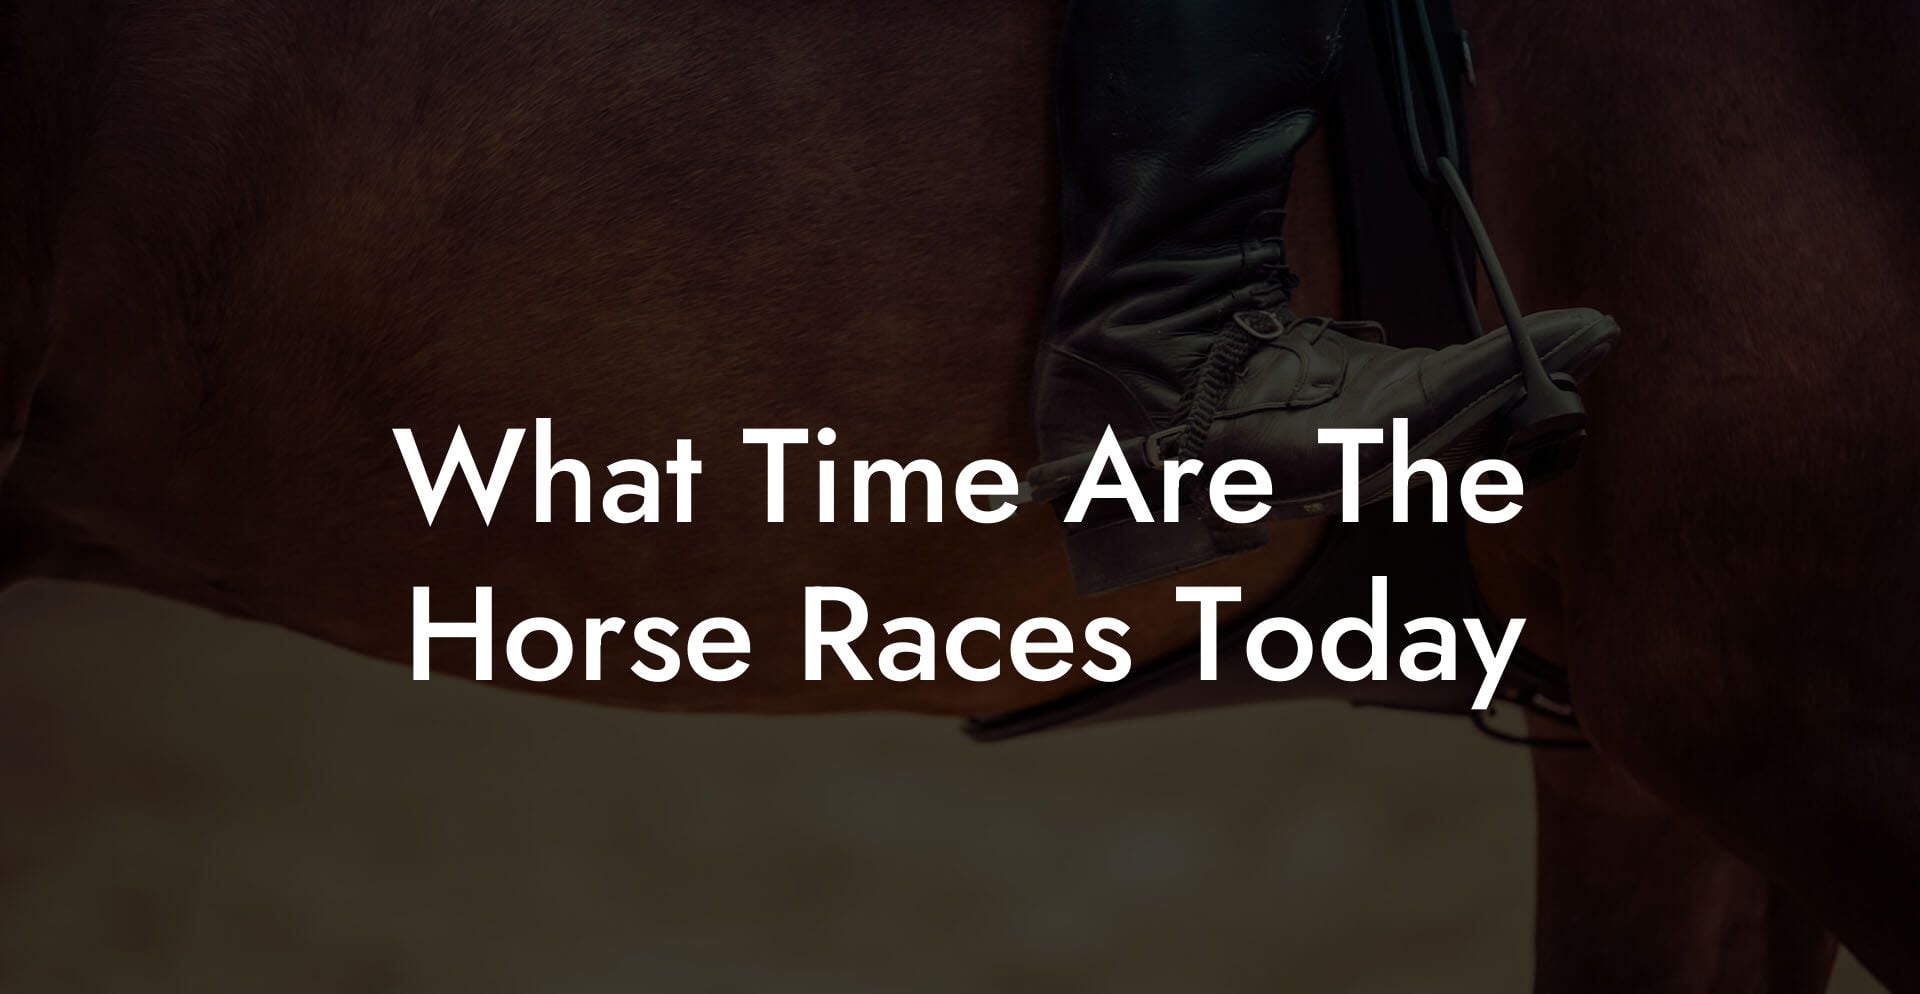 What Time Are The Horse Races Today